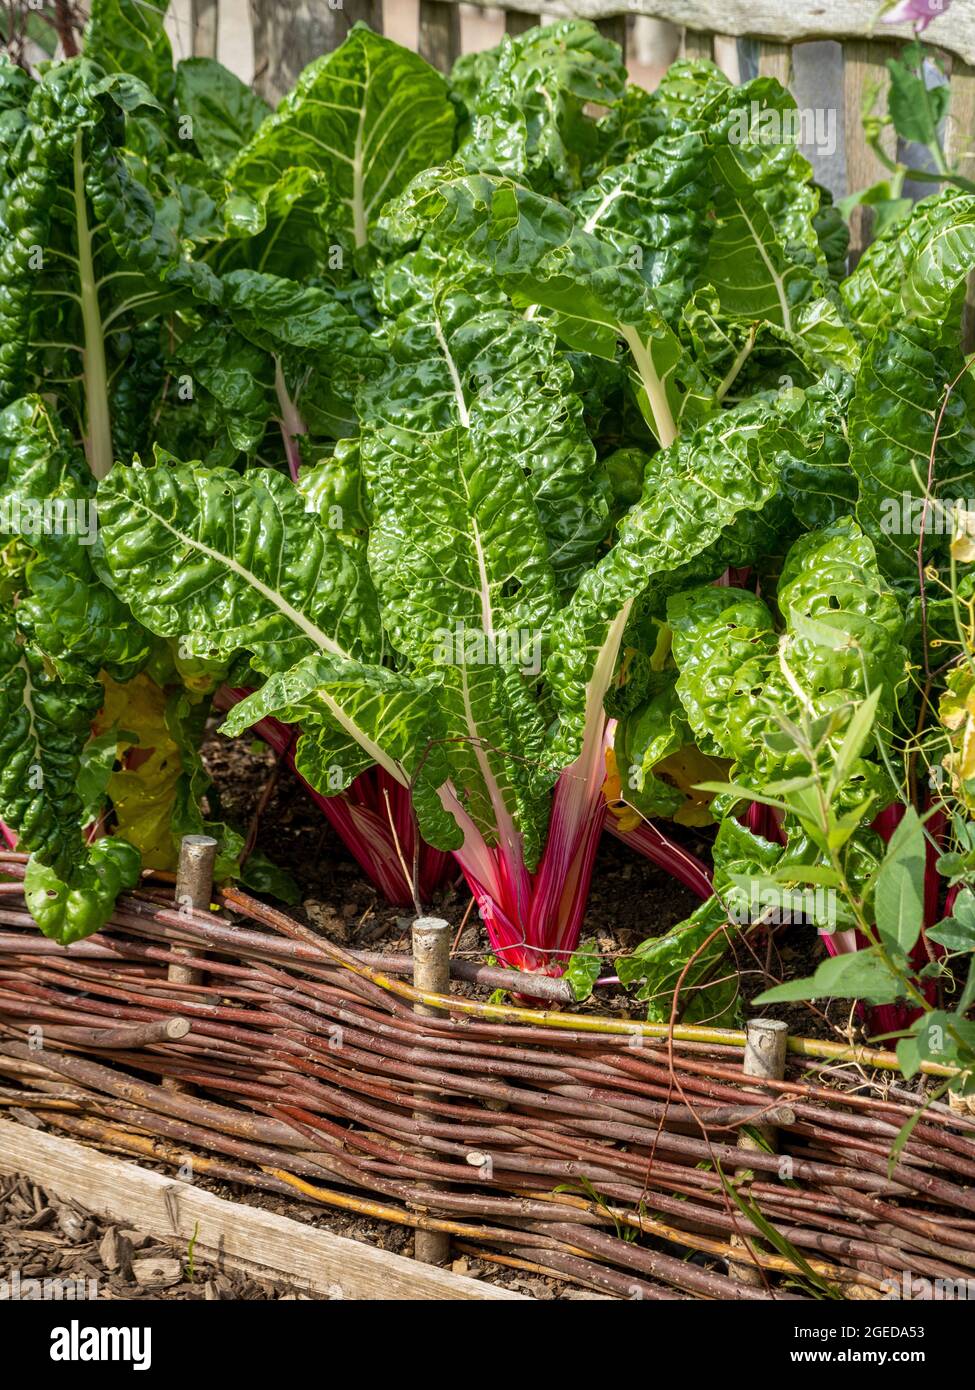 Ruby Swiss Chard growing in a woven willow raised bed, in a UK garden, Stock Photo